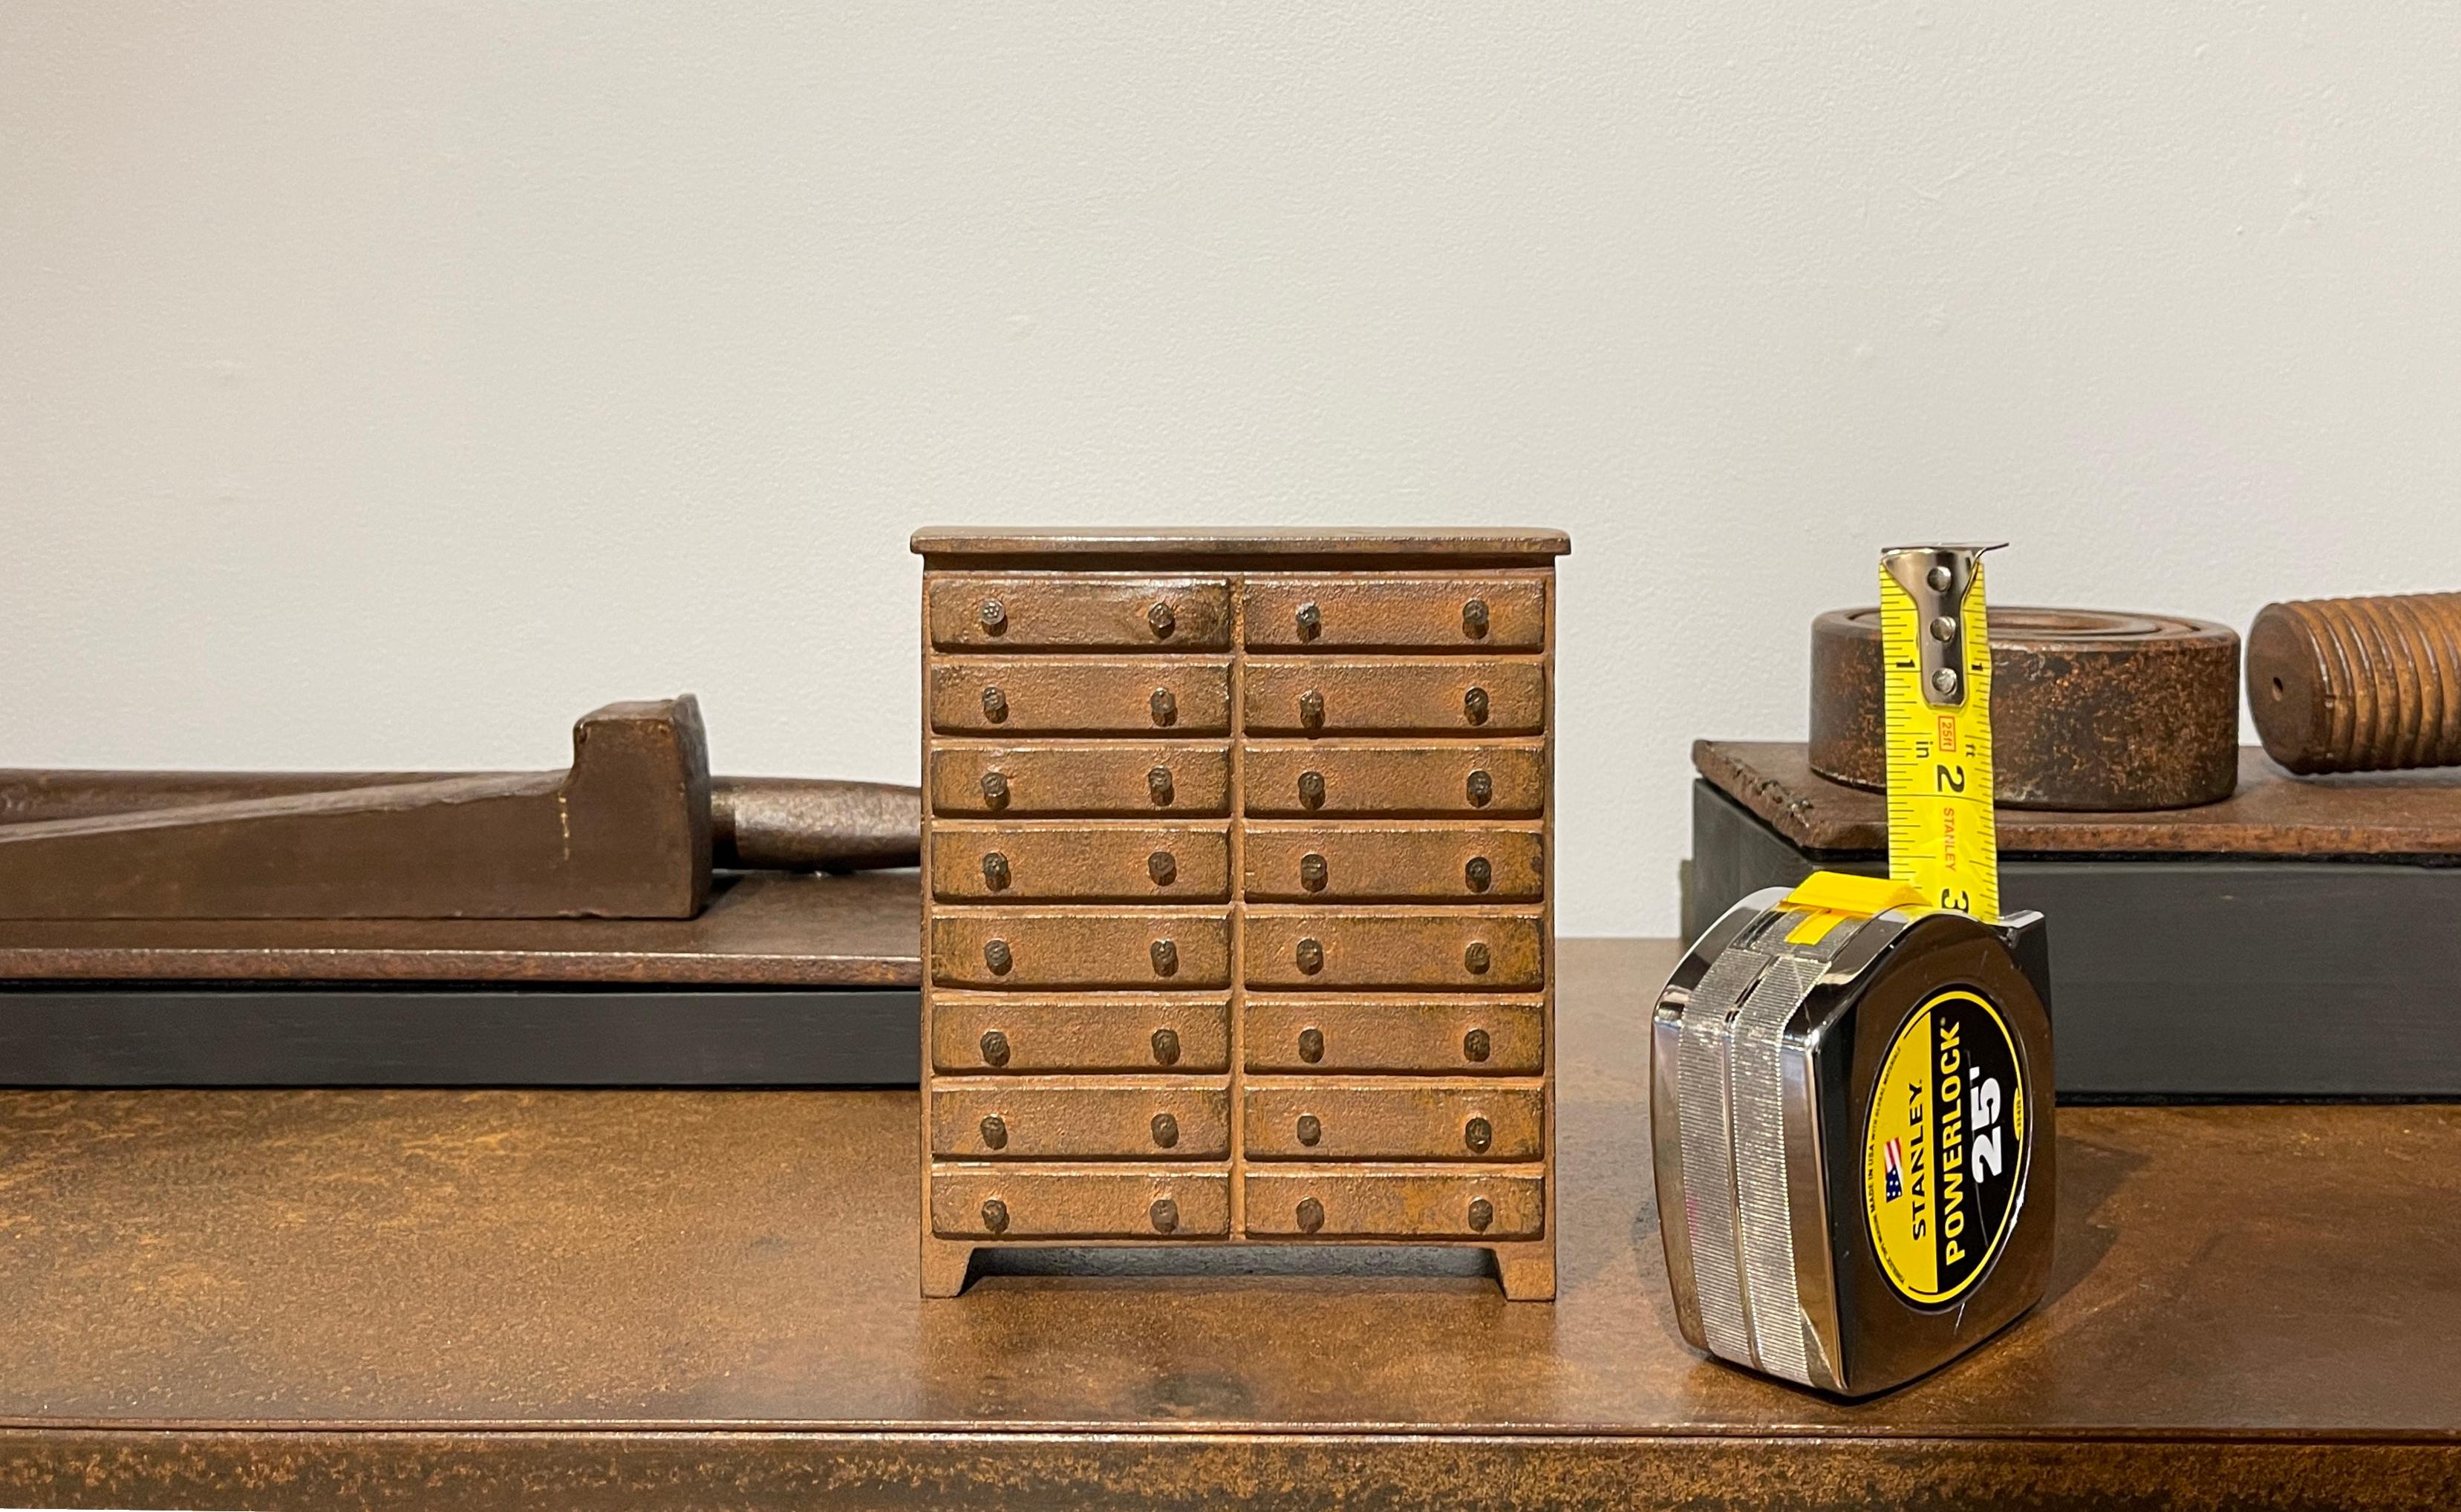 This exquisite miniature chest of drawers is inspired by Shaker furniture. Made from solid cast iron with a natural rust patina and vintage nail heads for the drawer pulls, The artist created this sculpture during an artist residency at the John